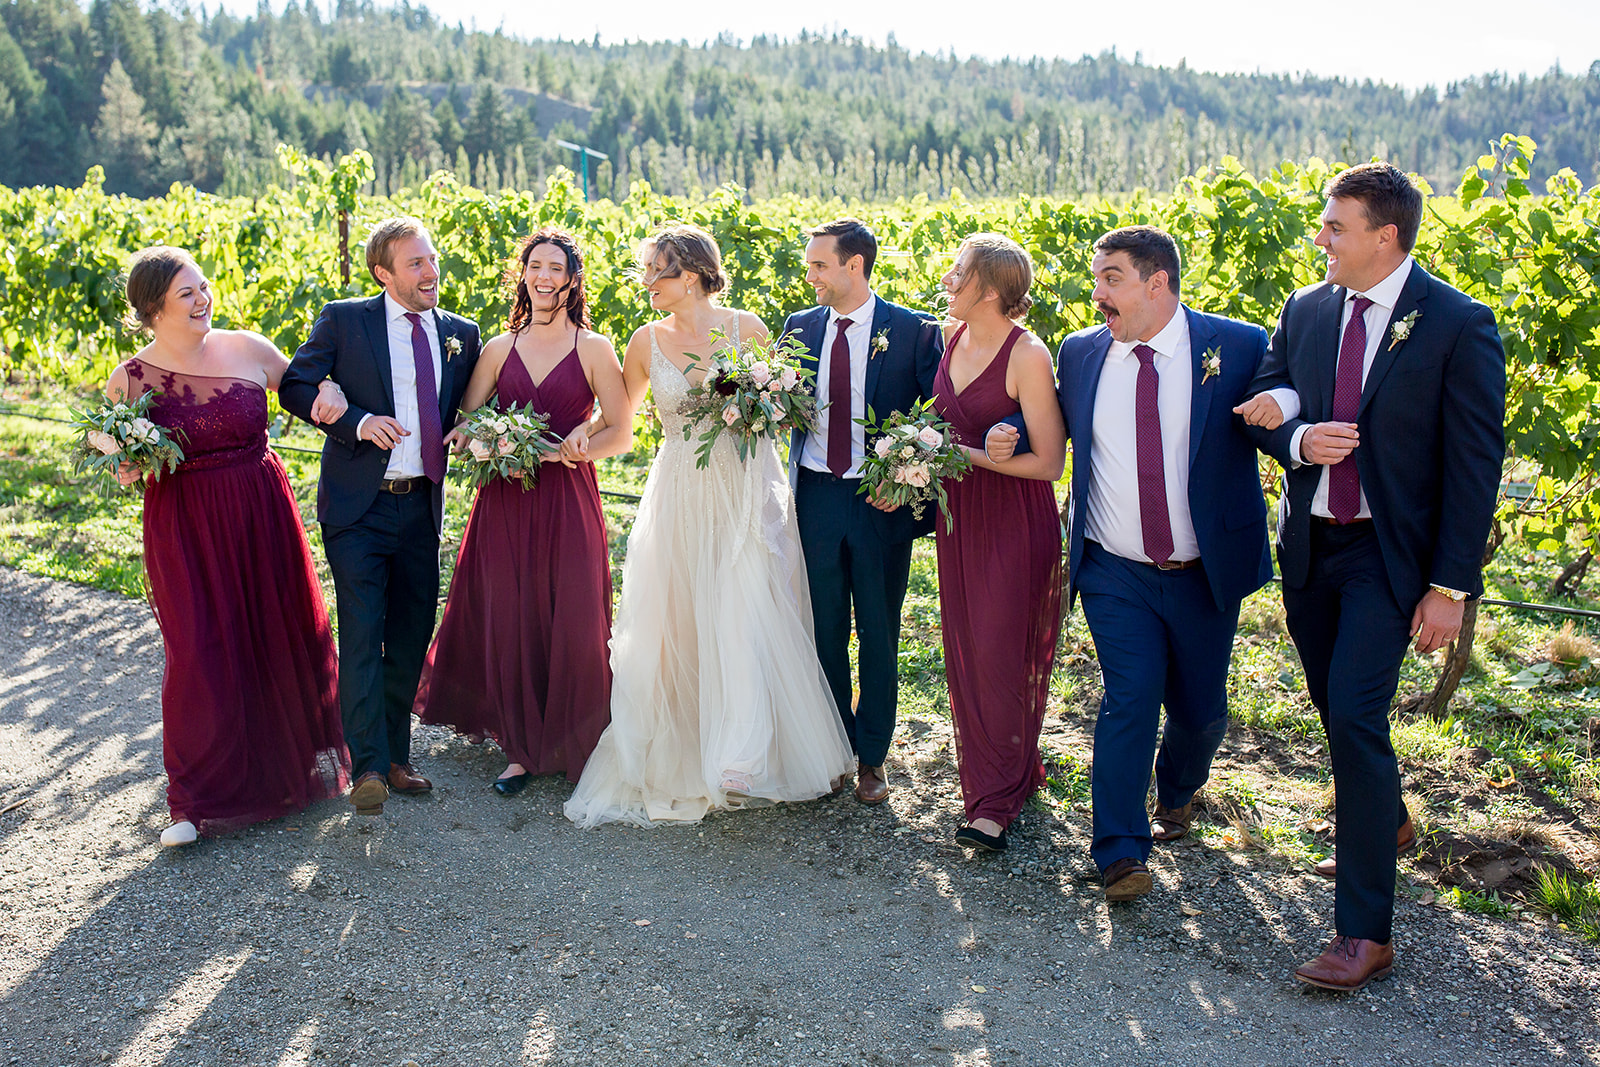 Bride, groom, and their bridal party pose outside at the Monte Creek Winery in BC in celebration of this special day